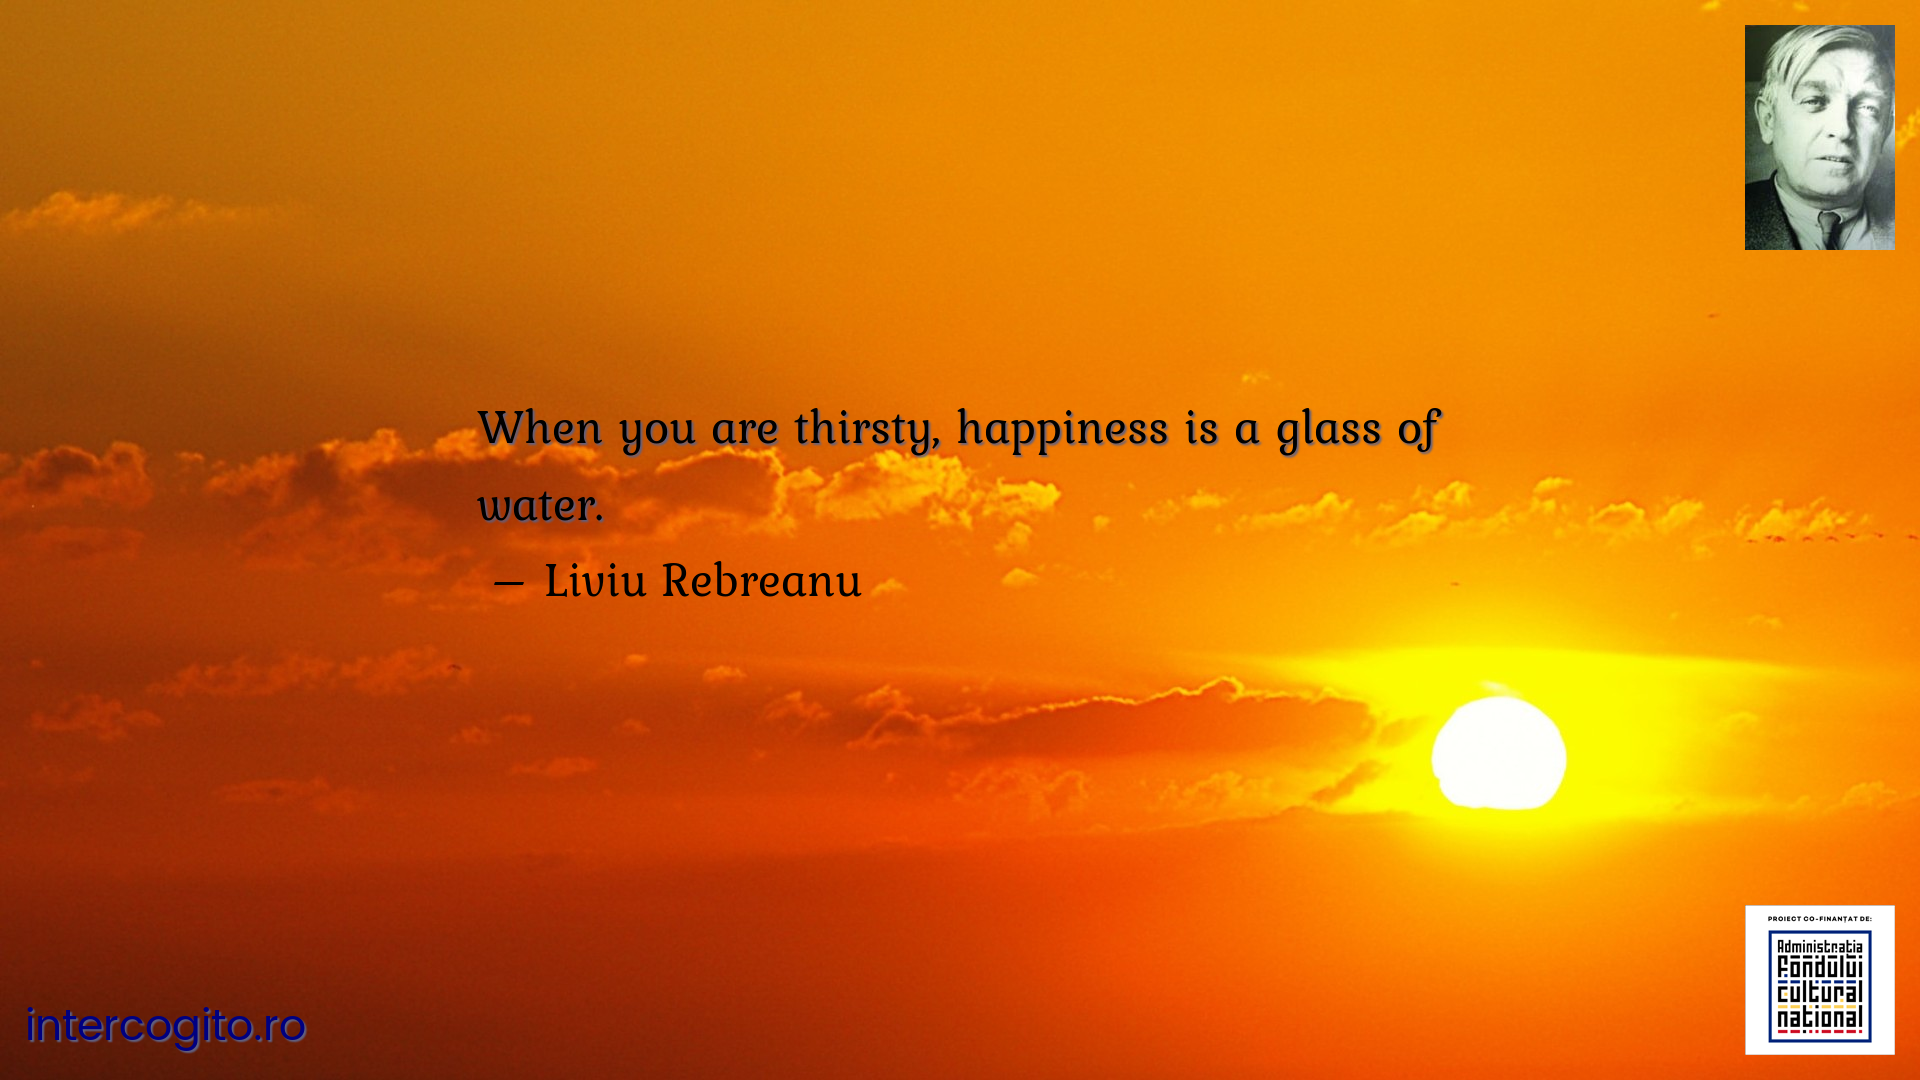 When you are thirsty, happiness is a glass of water.